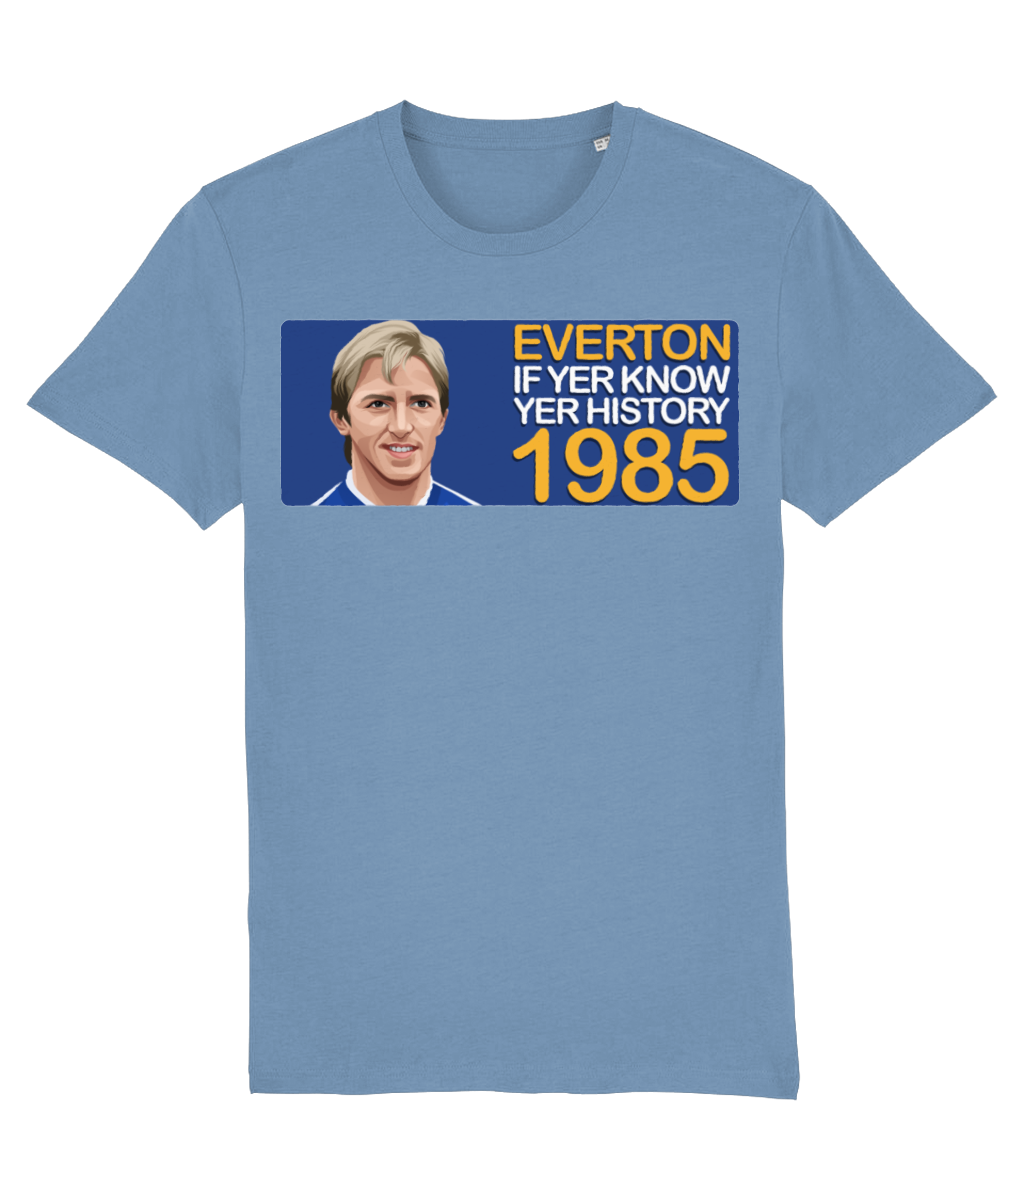 Everton 1985 Gary Stevens If Yer Know Yer History Unisex T-Shirt Stanley/Stella Retrotext Mid Heather Blue XX-Small 